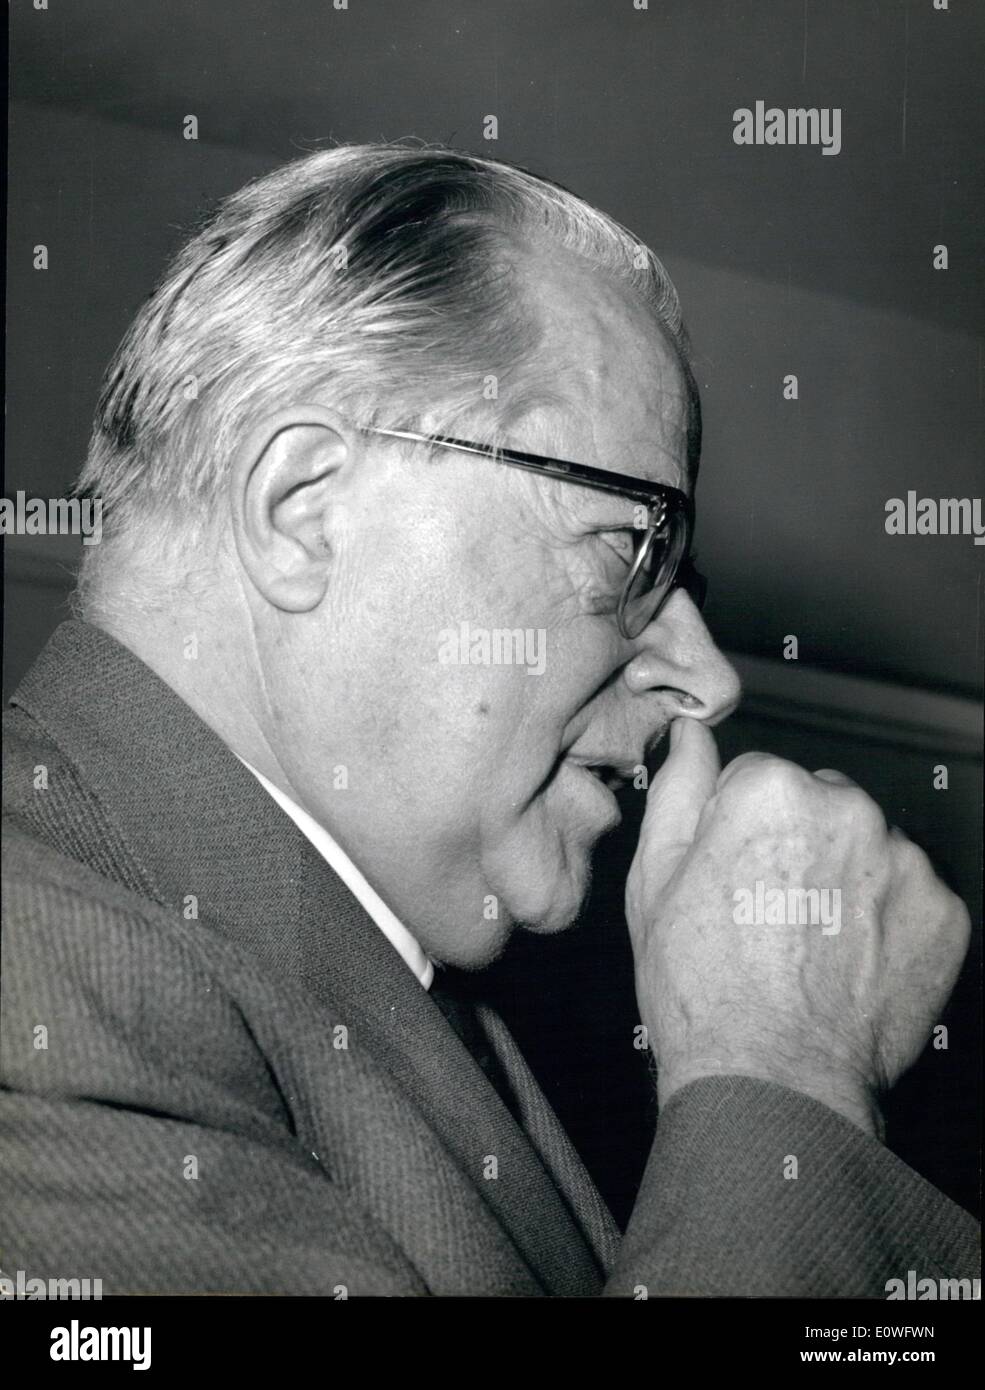 Nov. 11, 1962 - On .Le Palmiro Togliatti leader of Italian Communist Party hold this morning a press conference in the see of the Foreign Press in Rome, talking to the journalists presents to the conference, on the international situation. Stock Photo